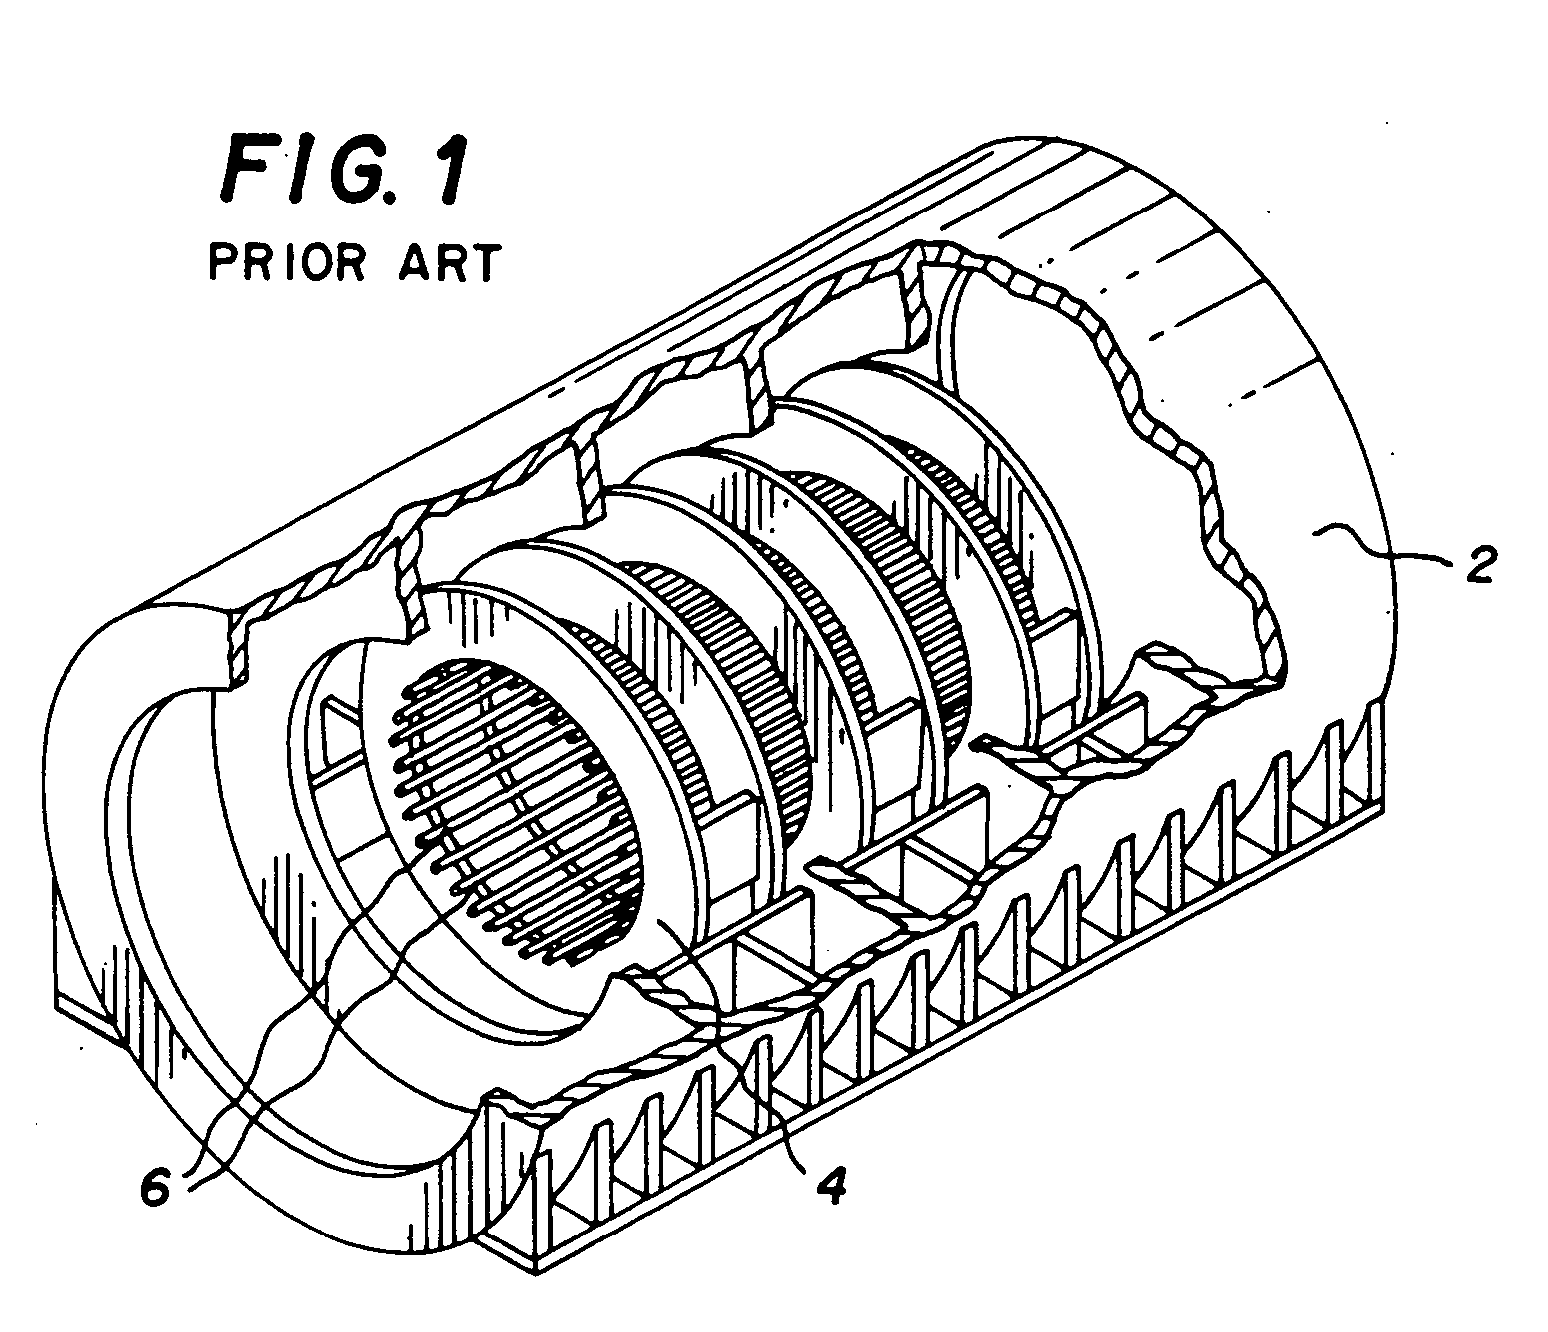 Horizontal assembly of stator core using keybar extensions